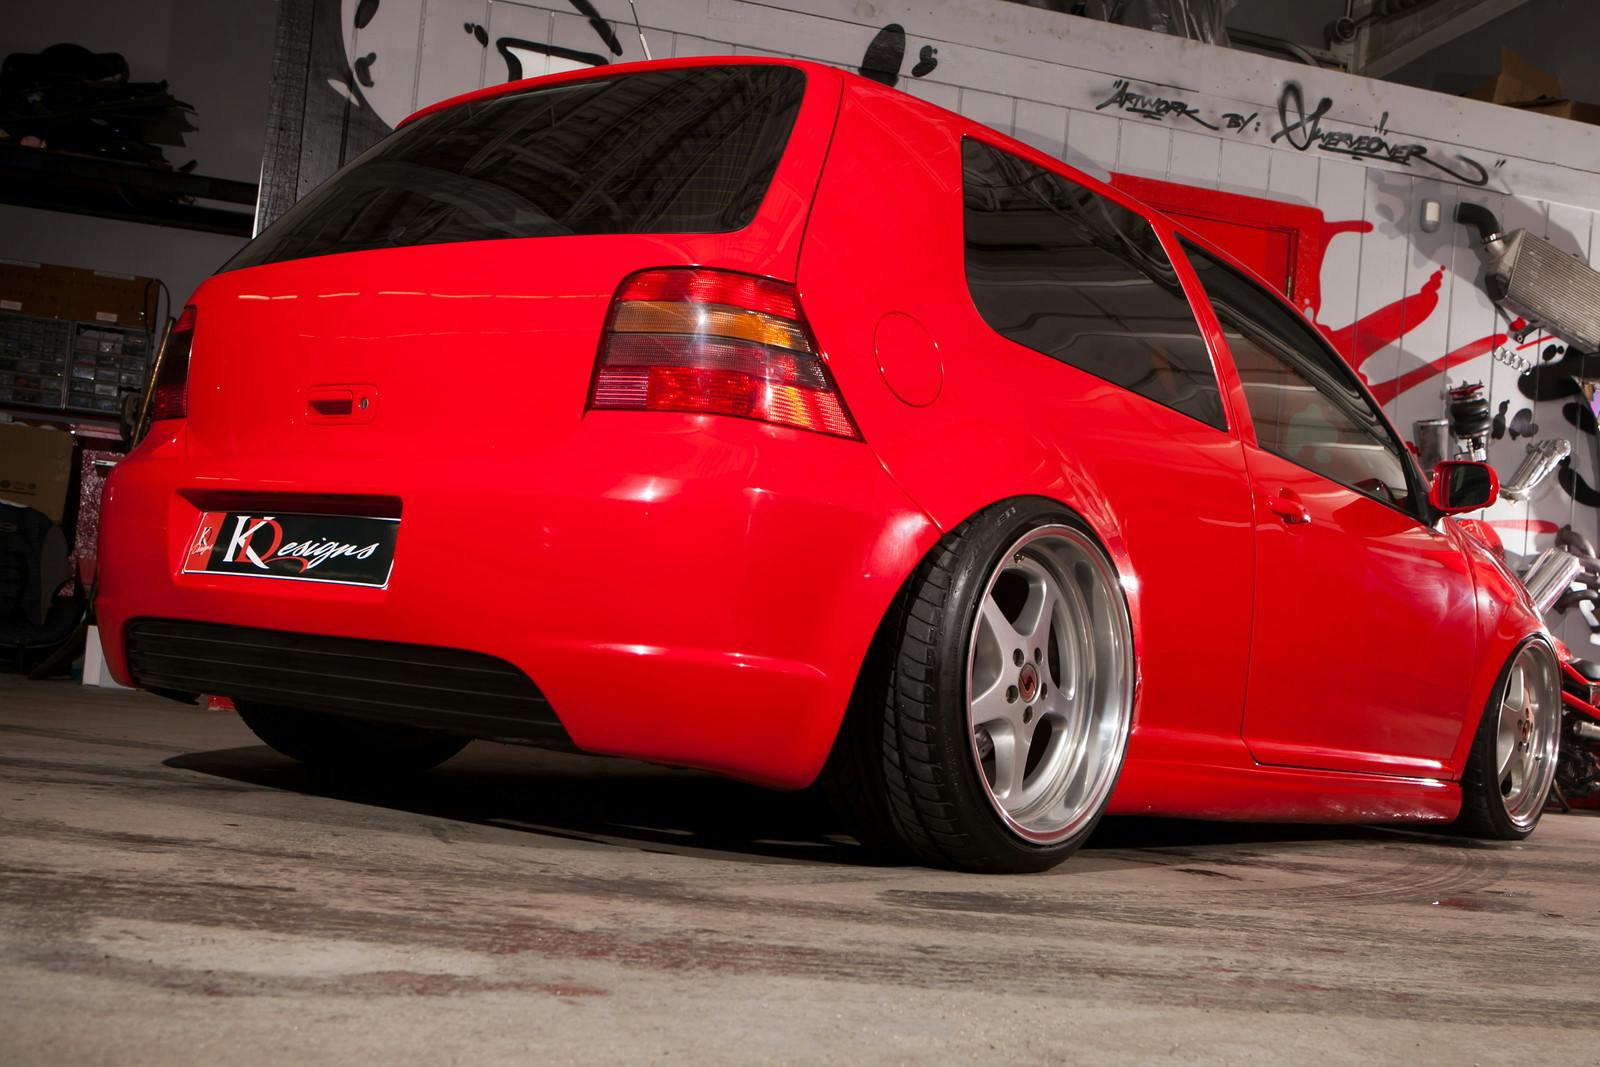 Kyle Duquesnay’s MK4 Golf on Air Lift Performance air suspension